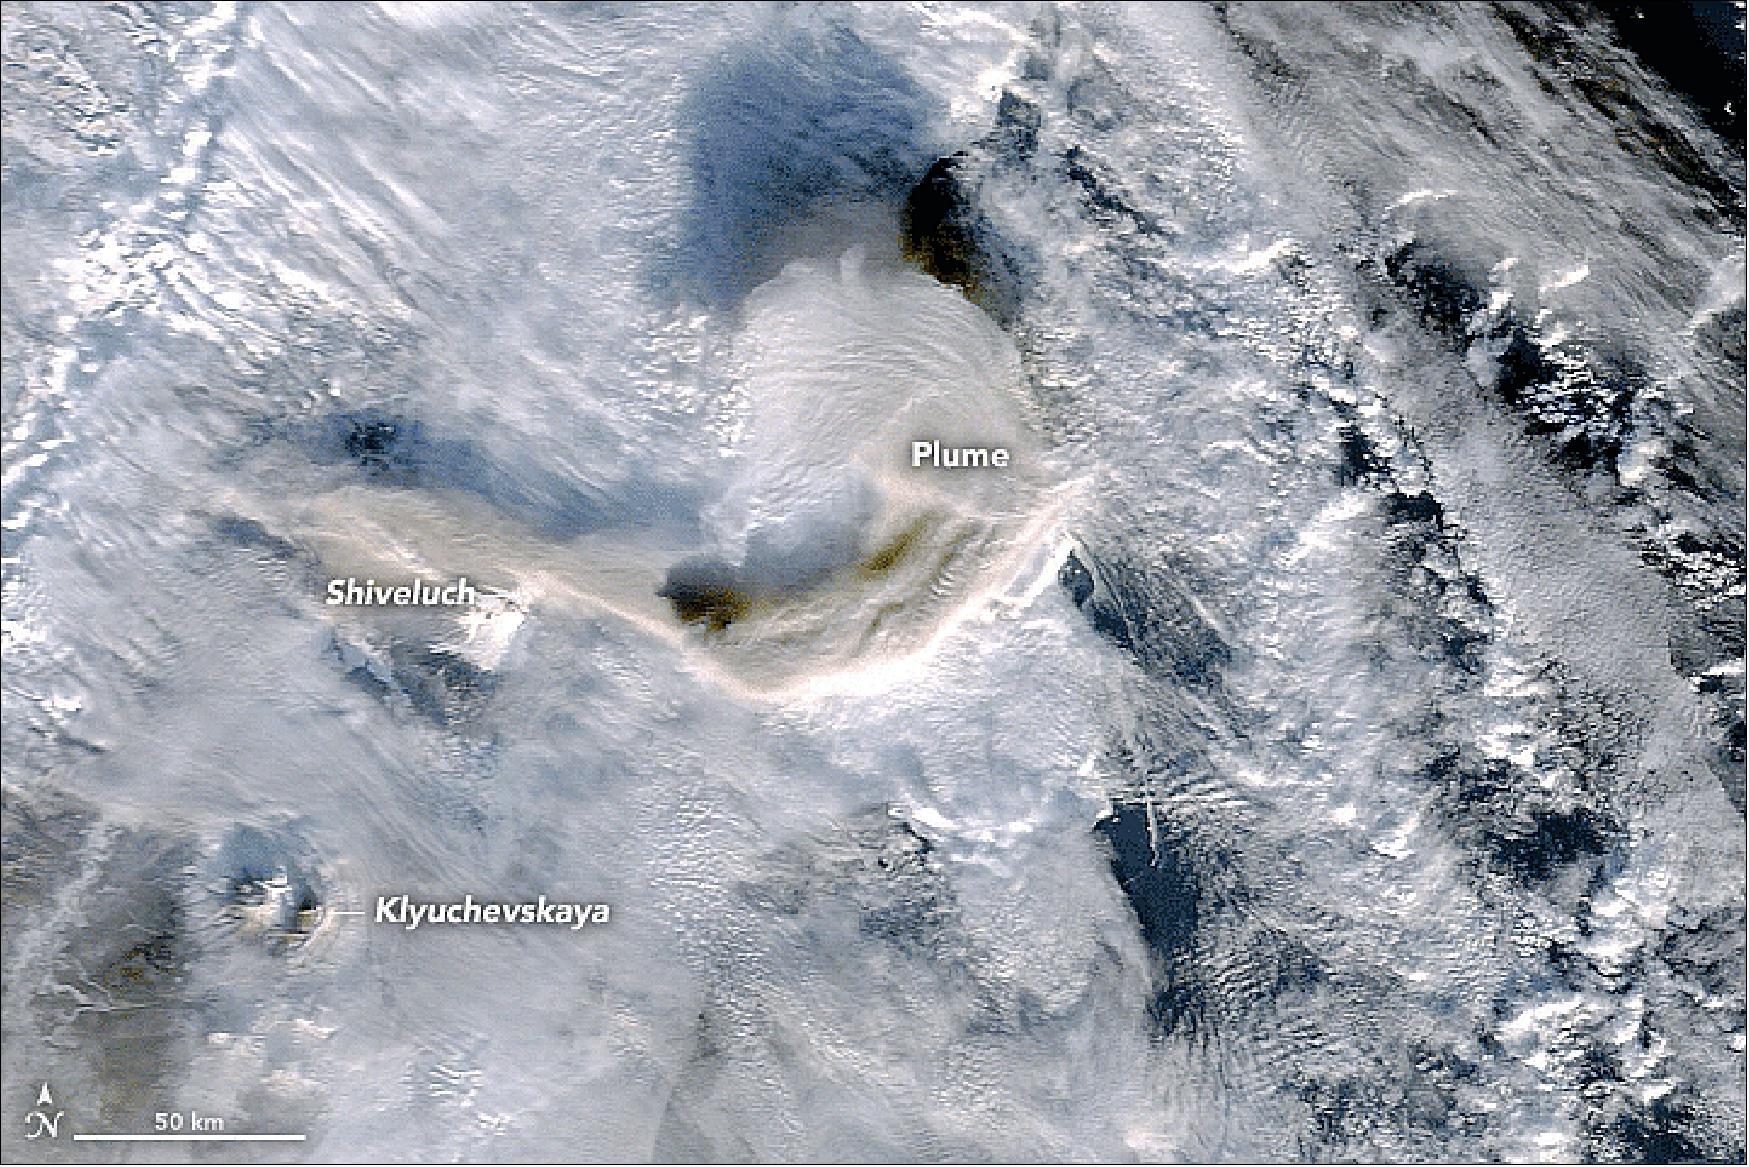 Figure 40: The MODIS instrument on Terra observed the plumes rising from the Shiveluch and Klyuchevskaya volcanos on January 9 (image credit: NASA Earth Observatory, image by Joshua Stevens and Jeff Schmaltz, using MODIS data from LANCE/EOSDIS Rapid Response. Story by Michael Carlowicz)